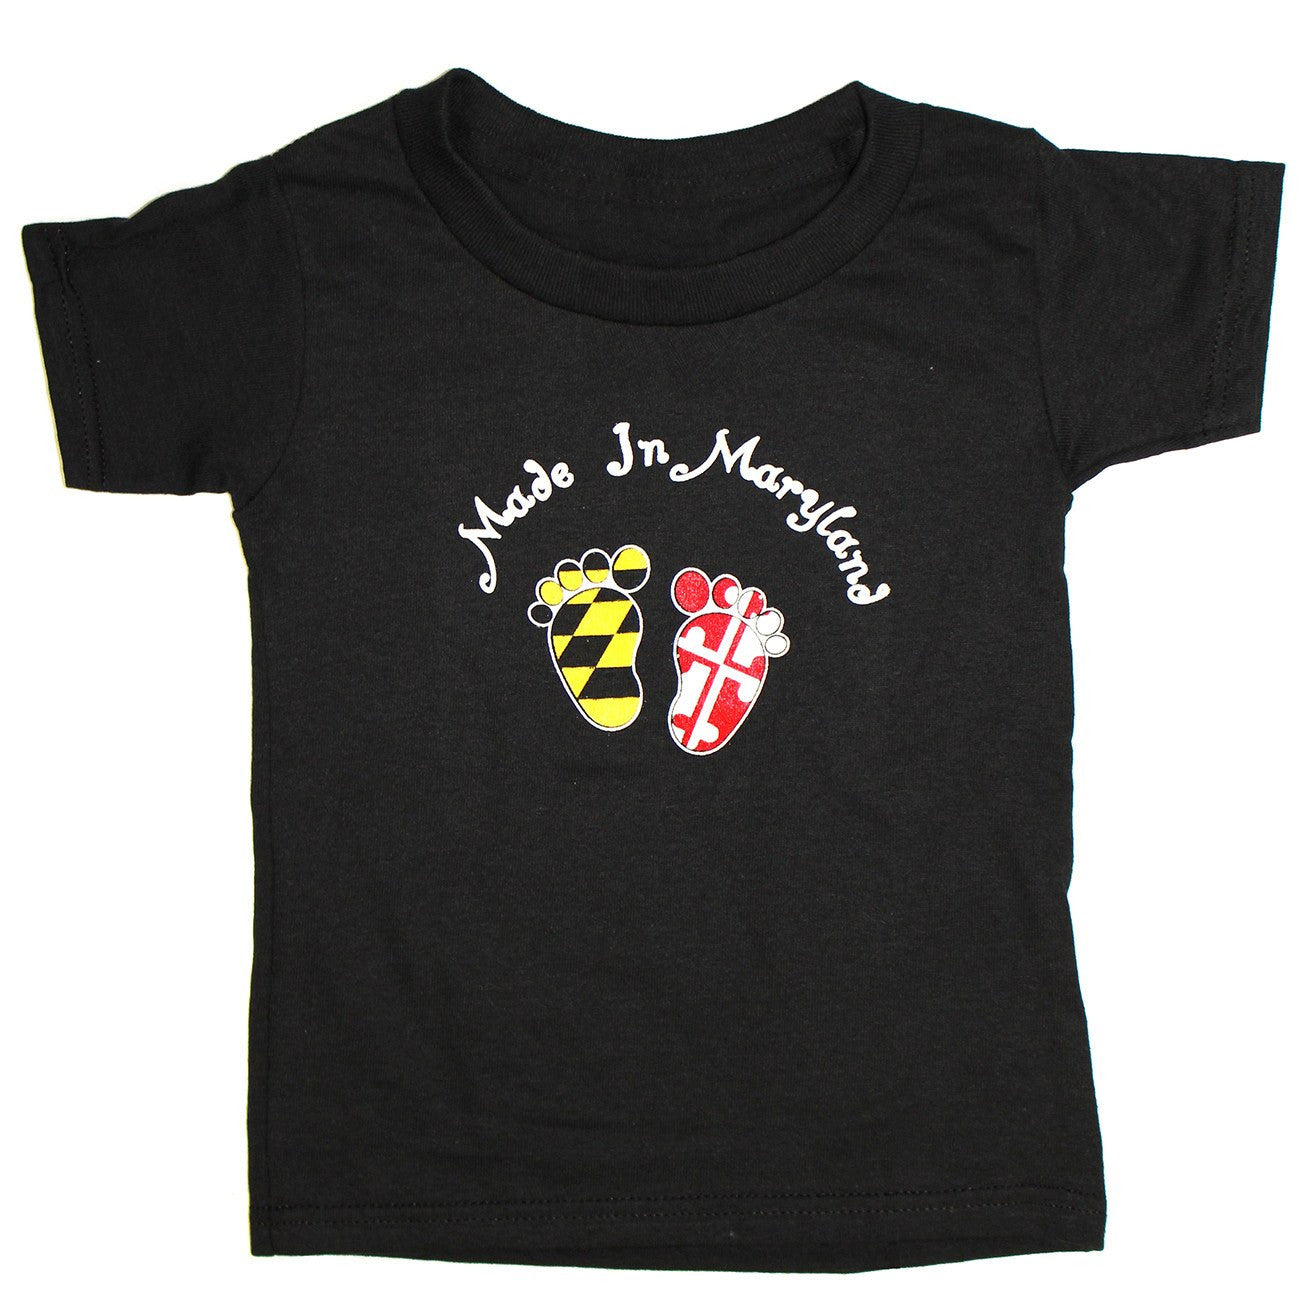 Made in Maryland (Black) / *Toddler* Shirt - Route One Apparel